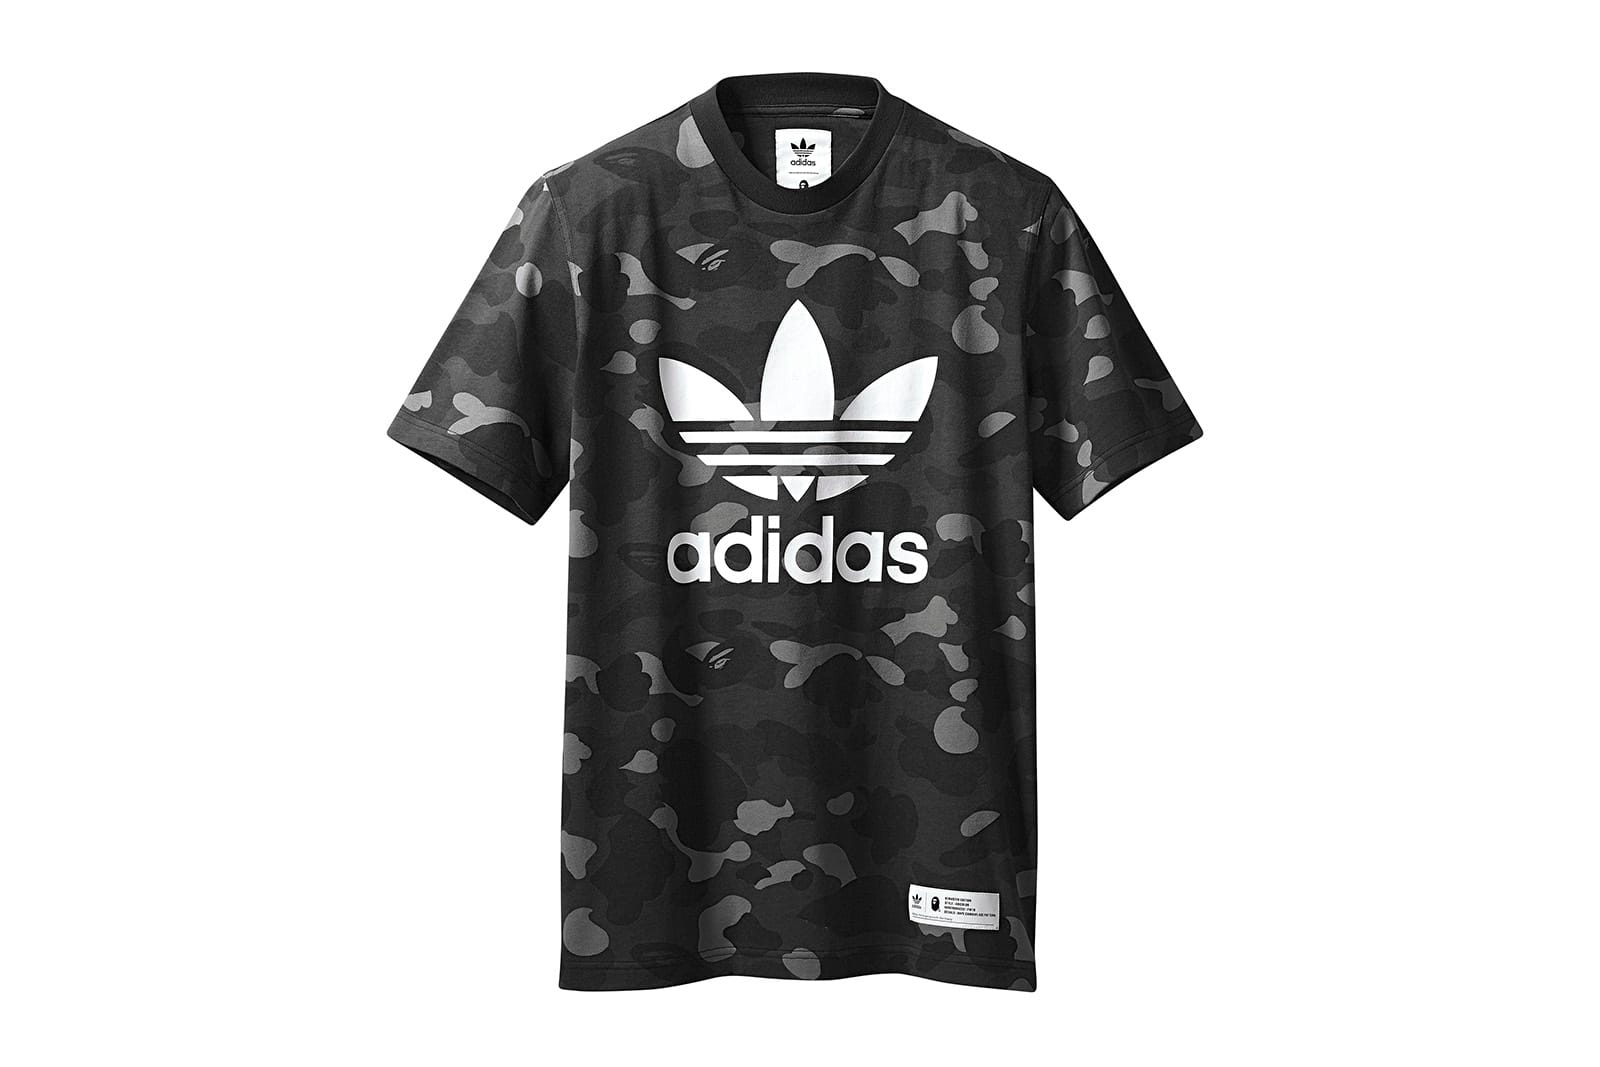 adidas clothing collection